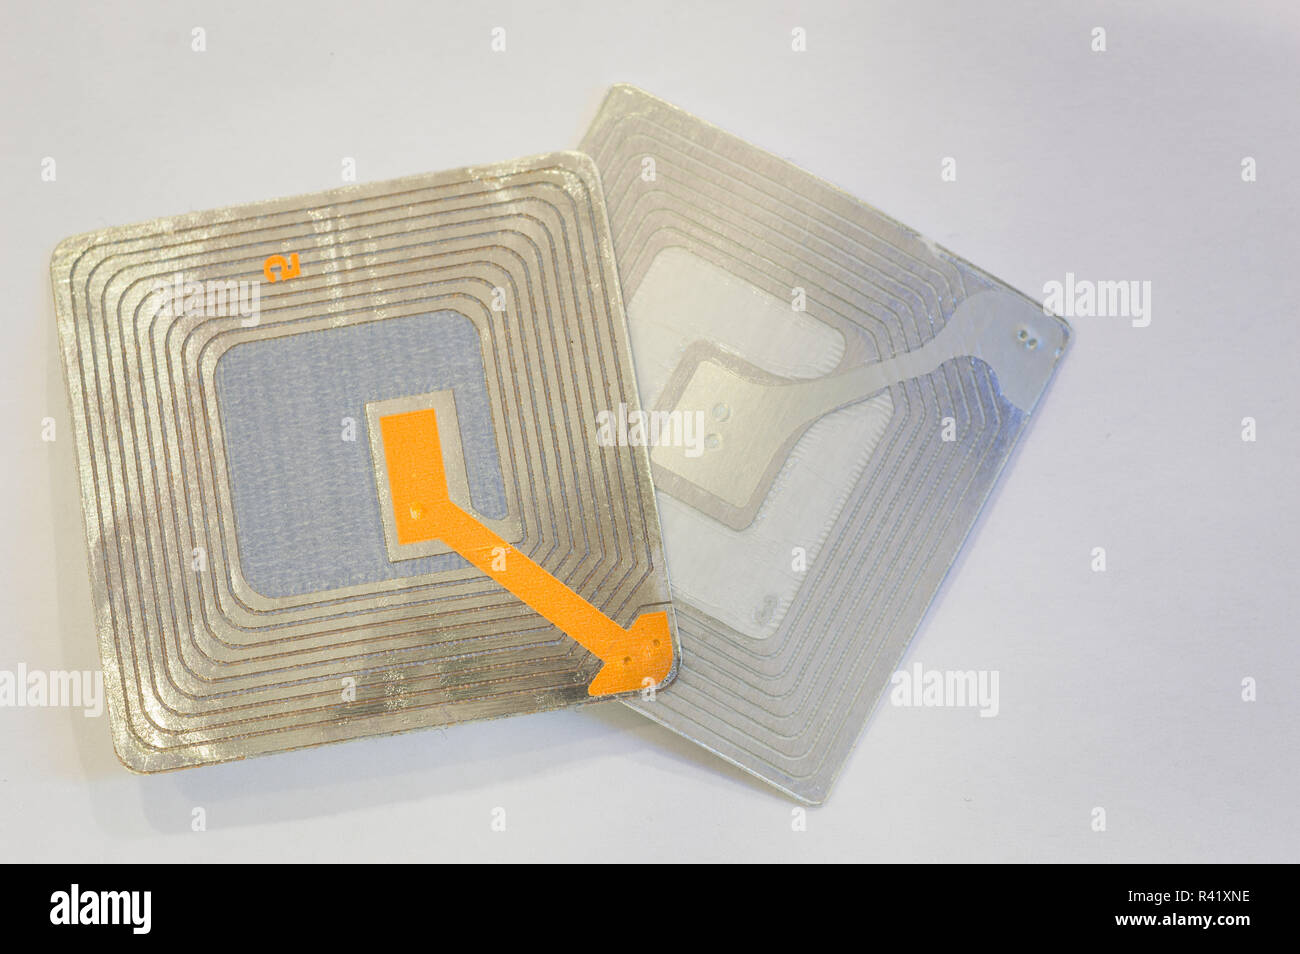 Close up of several RFID tags used for tracking and identification purposes and as an anti-theft system in commerce and retail. Stock Photo